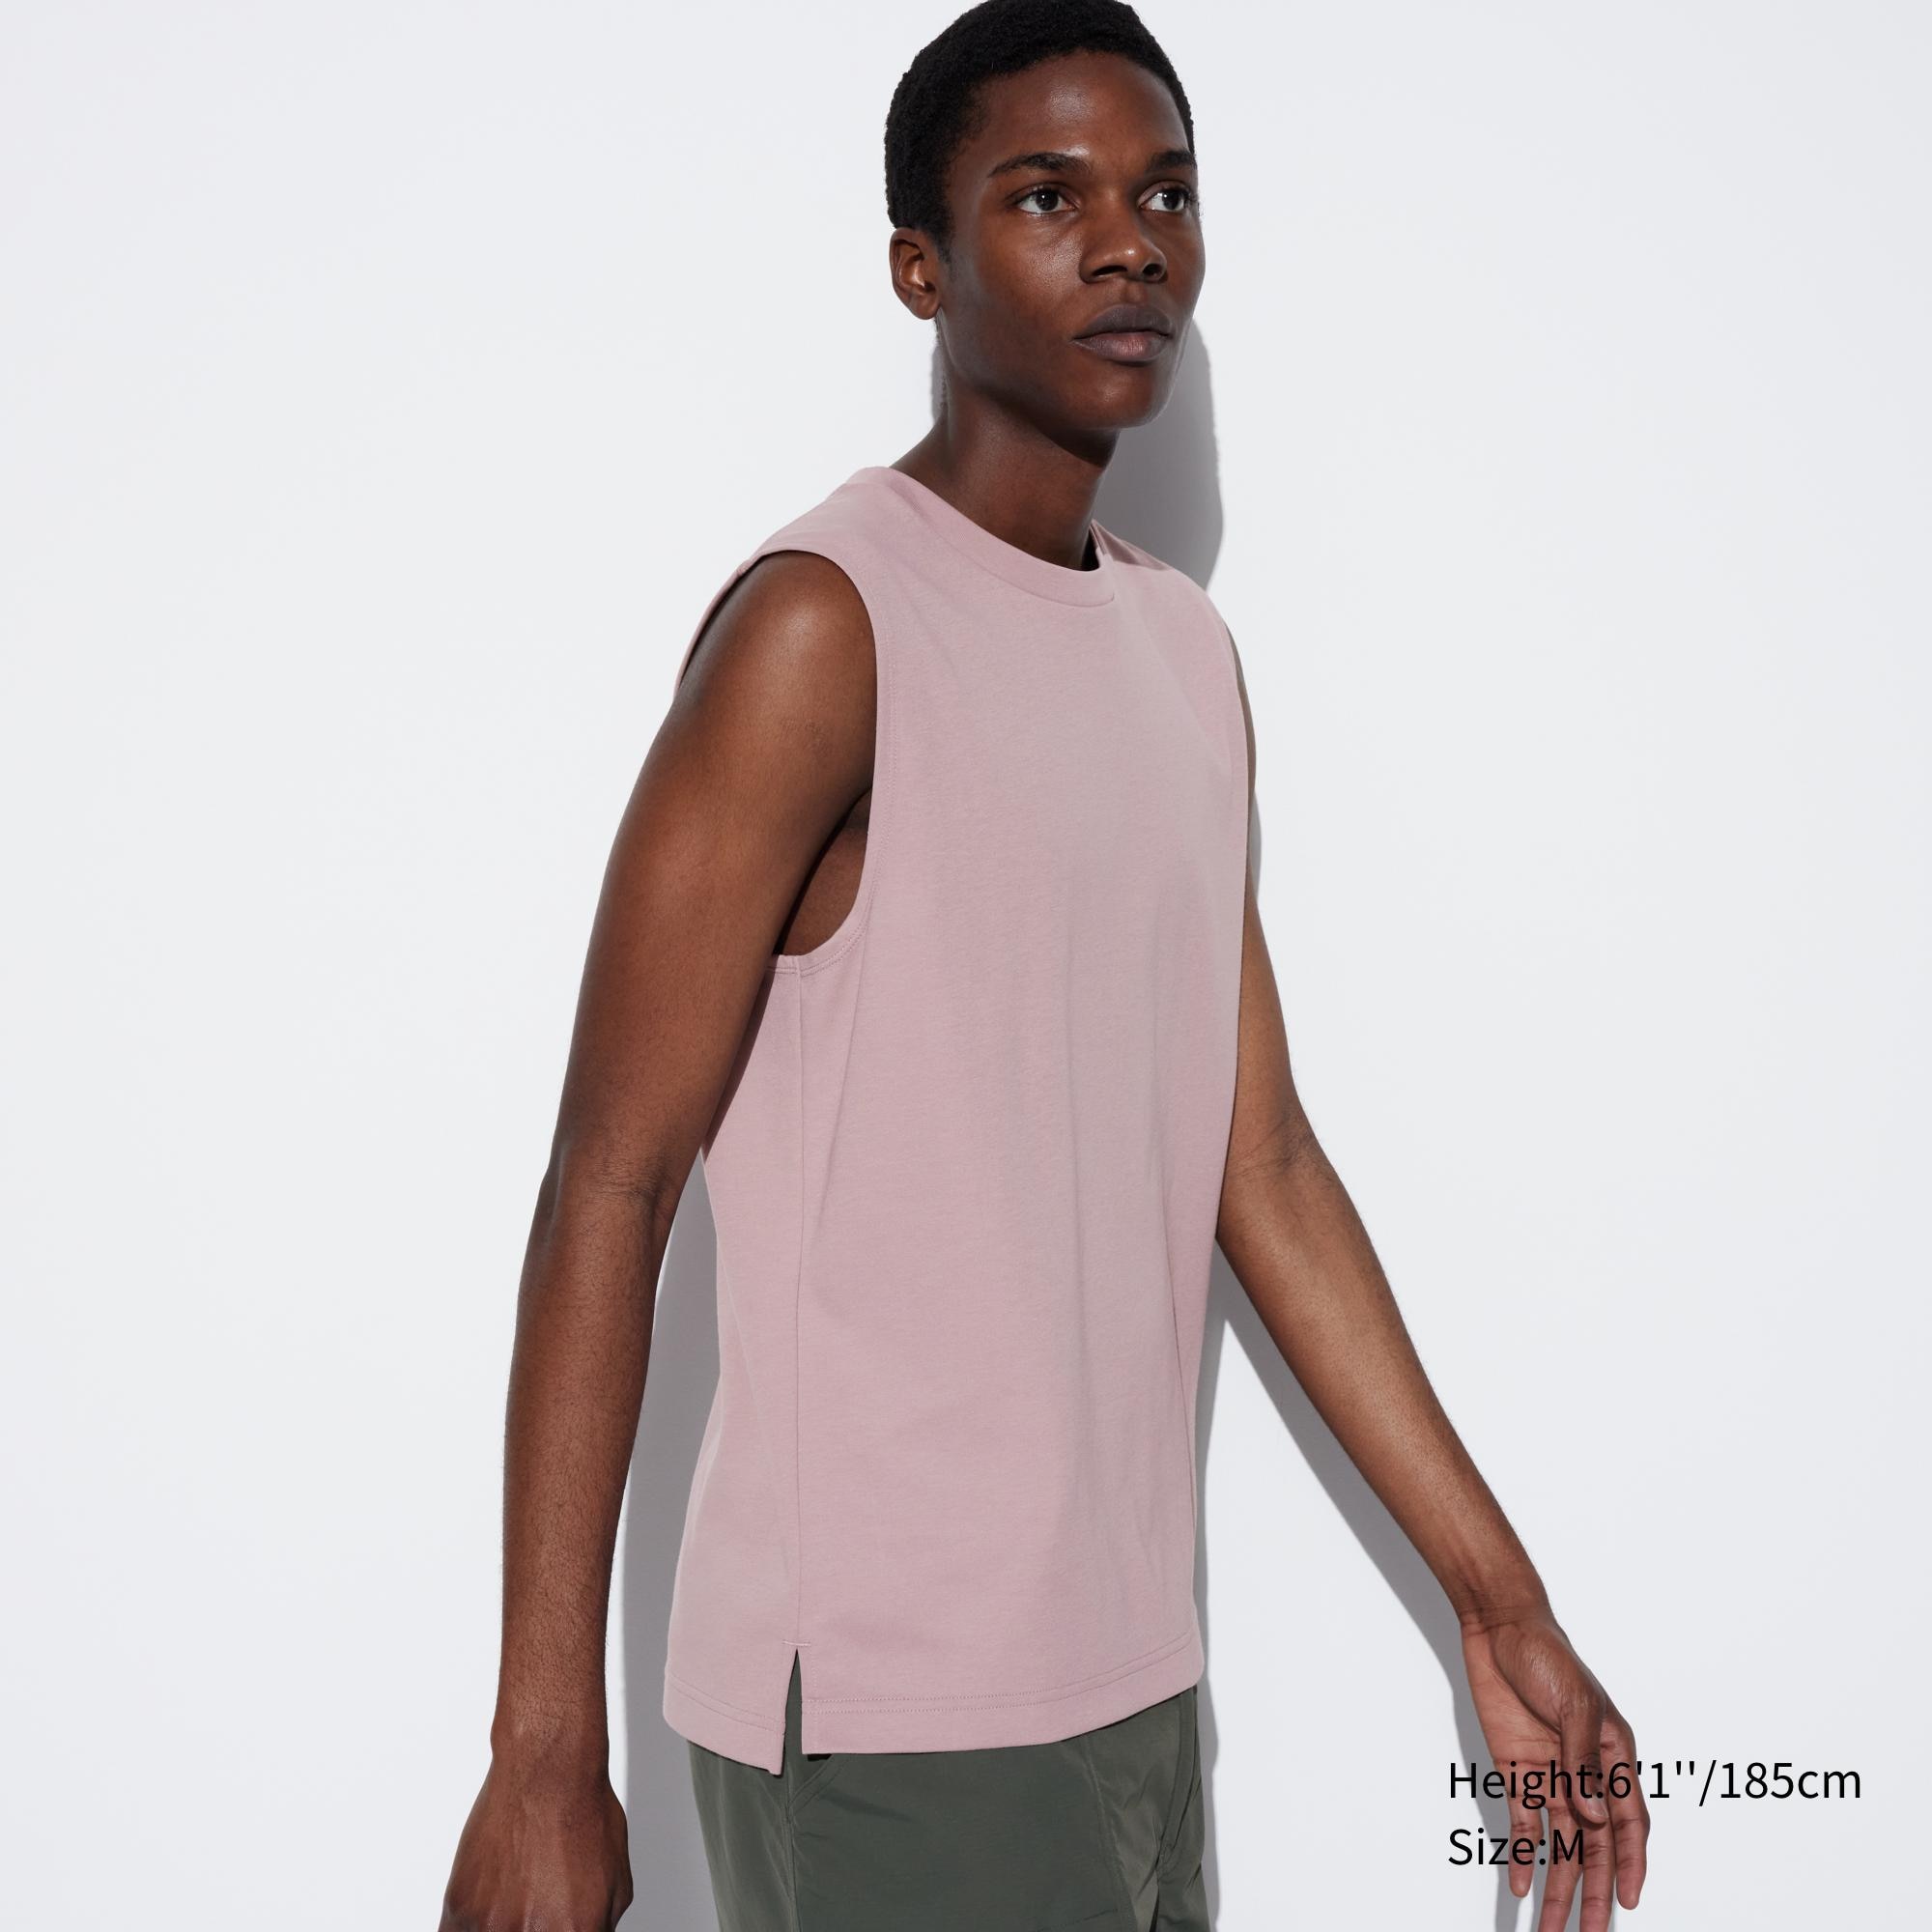 UNIQLO DRY RIBBED TANK TOP - Haul & Try On (All Colors Compared!) 